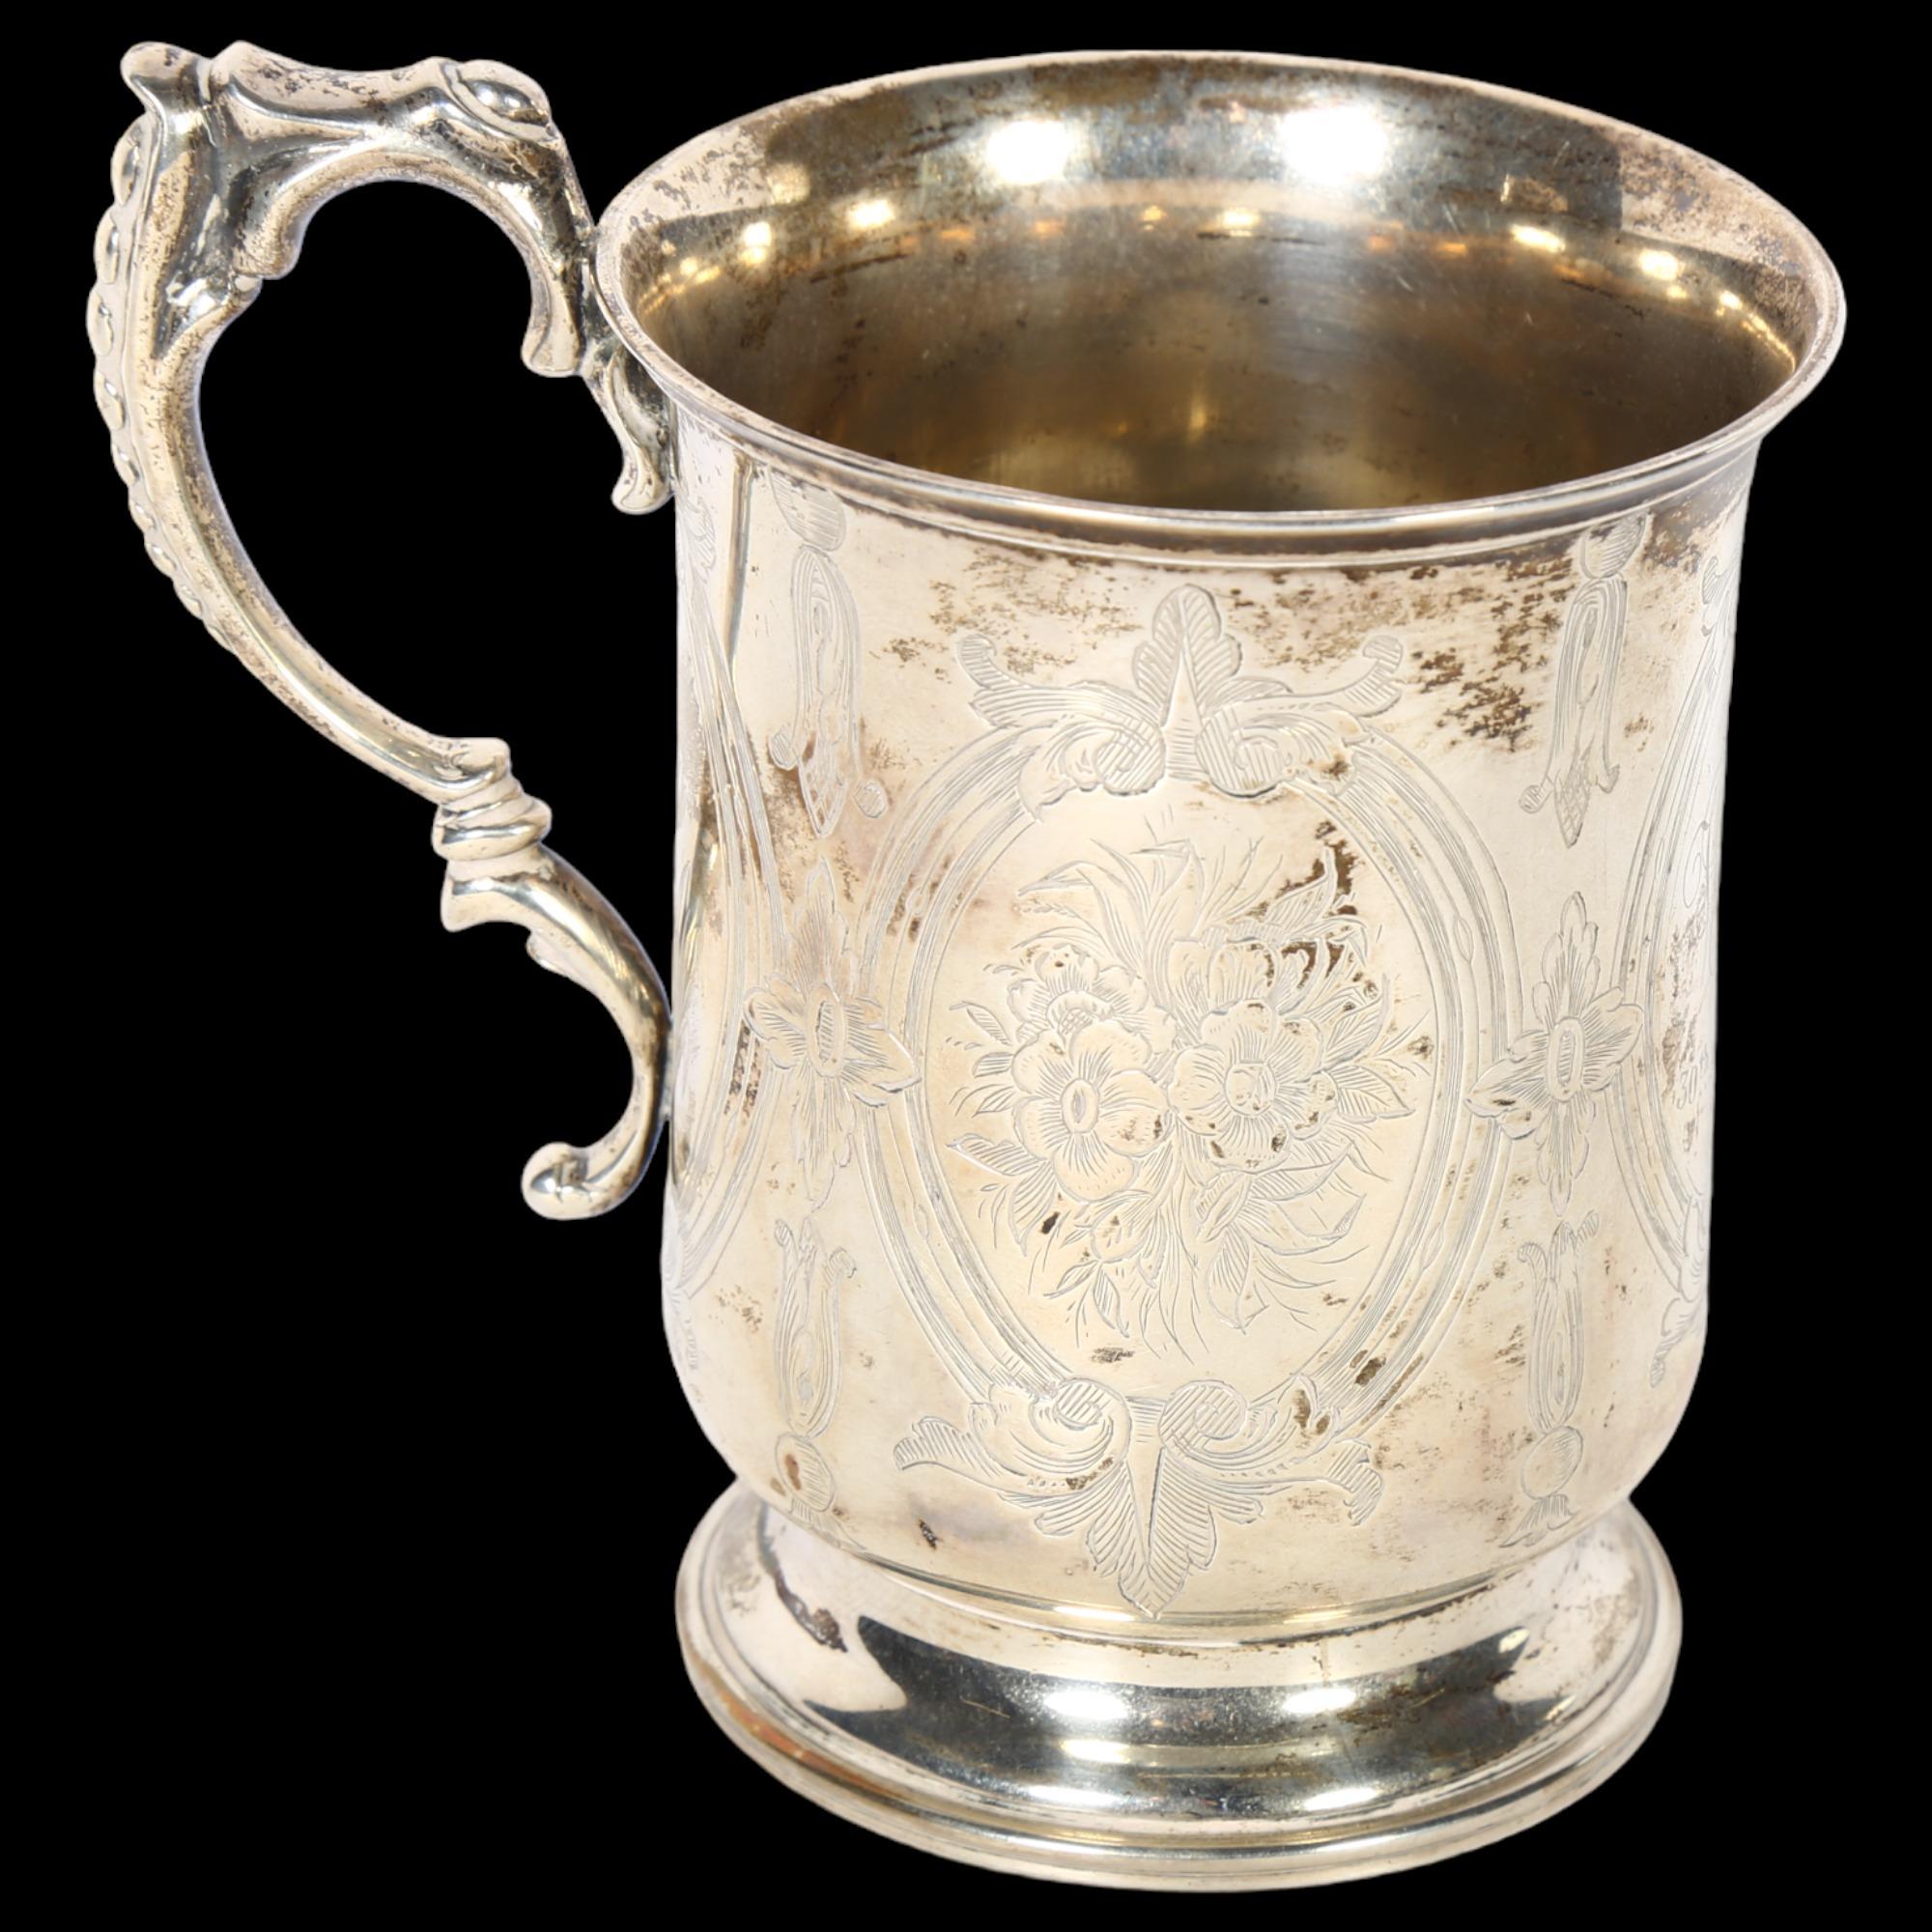 An ornate Victorian silver tankard on turned foot, with engraved decoration, with monogram HHR and